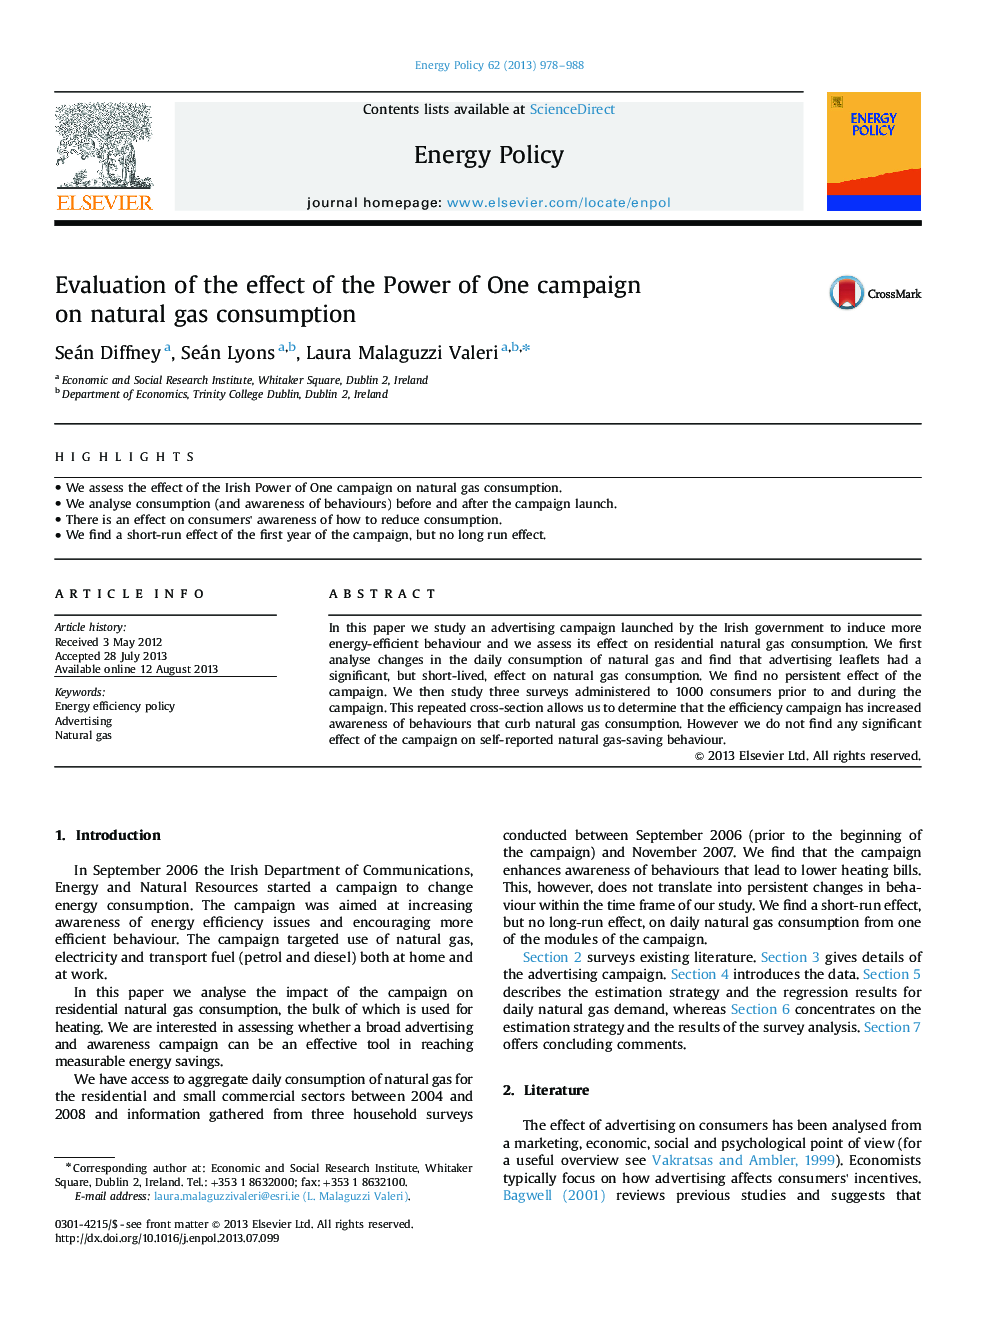 Evaluation of the effect of the Power of One campaign on natural gas consumption